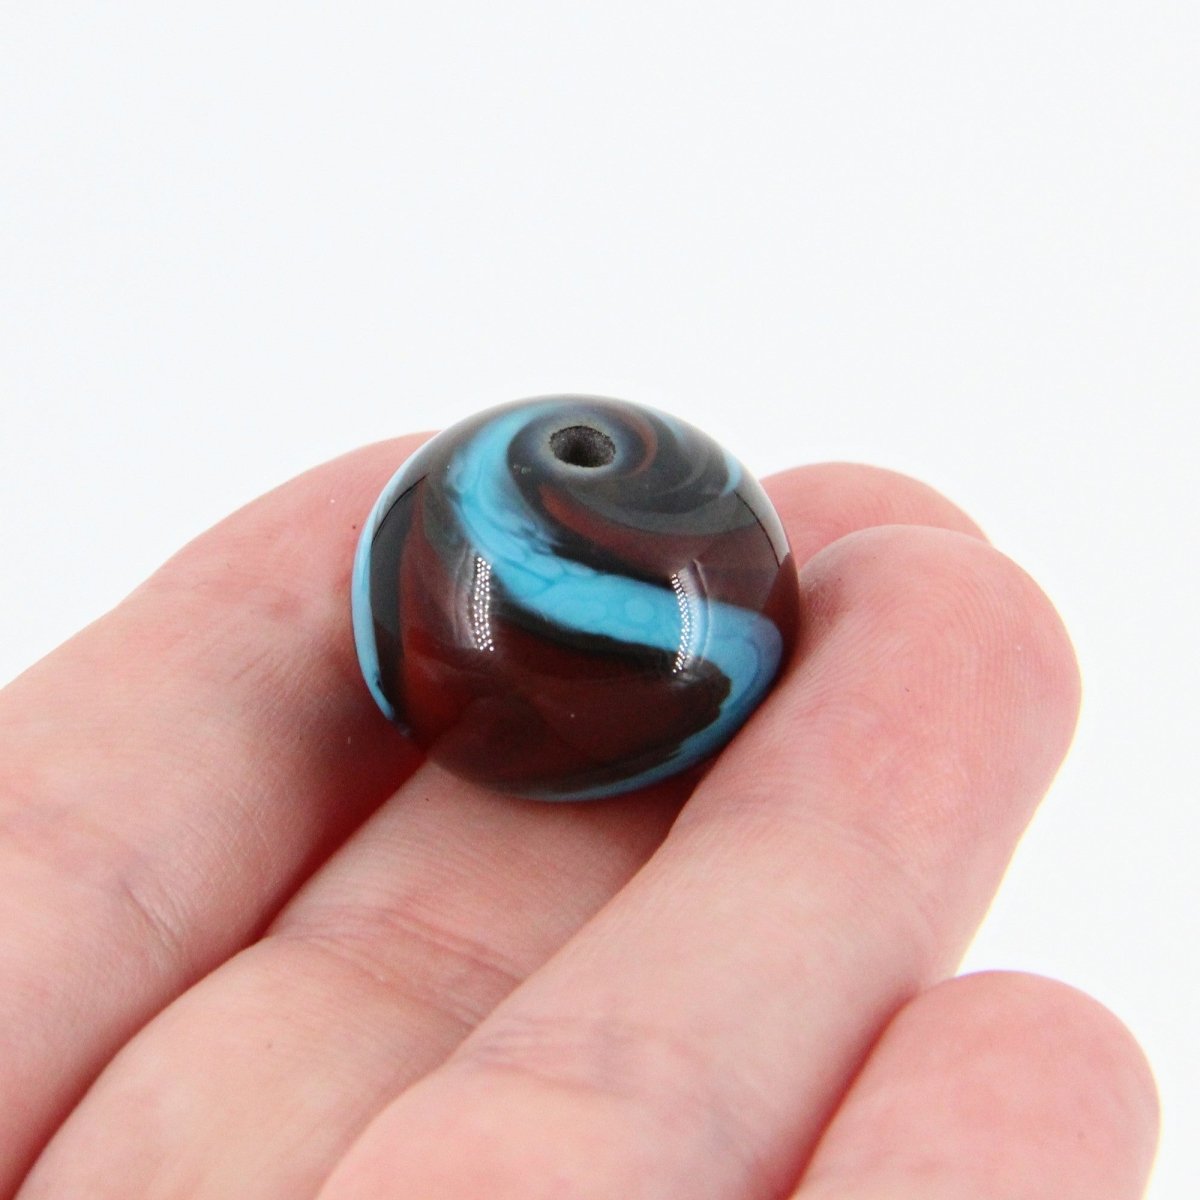 Turquoise and Red Striped Statement Bead - Handmade Glass Lampwork, Unique Focal Bead for Pendant, Suncatcher, or Home Decorating